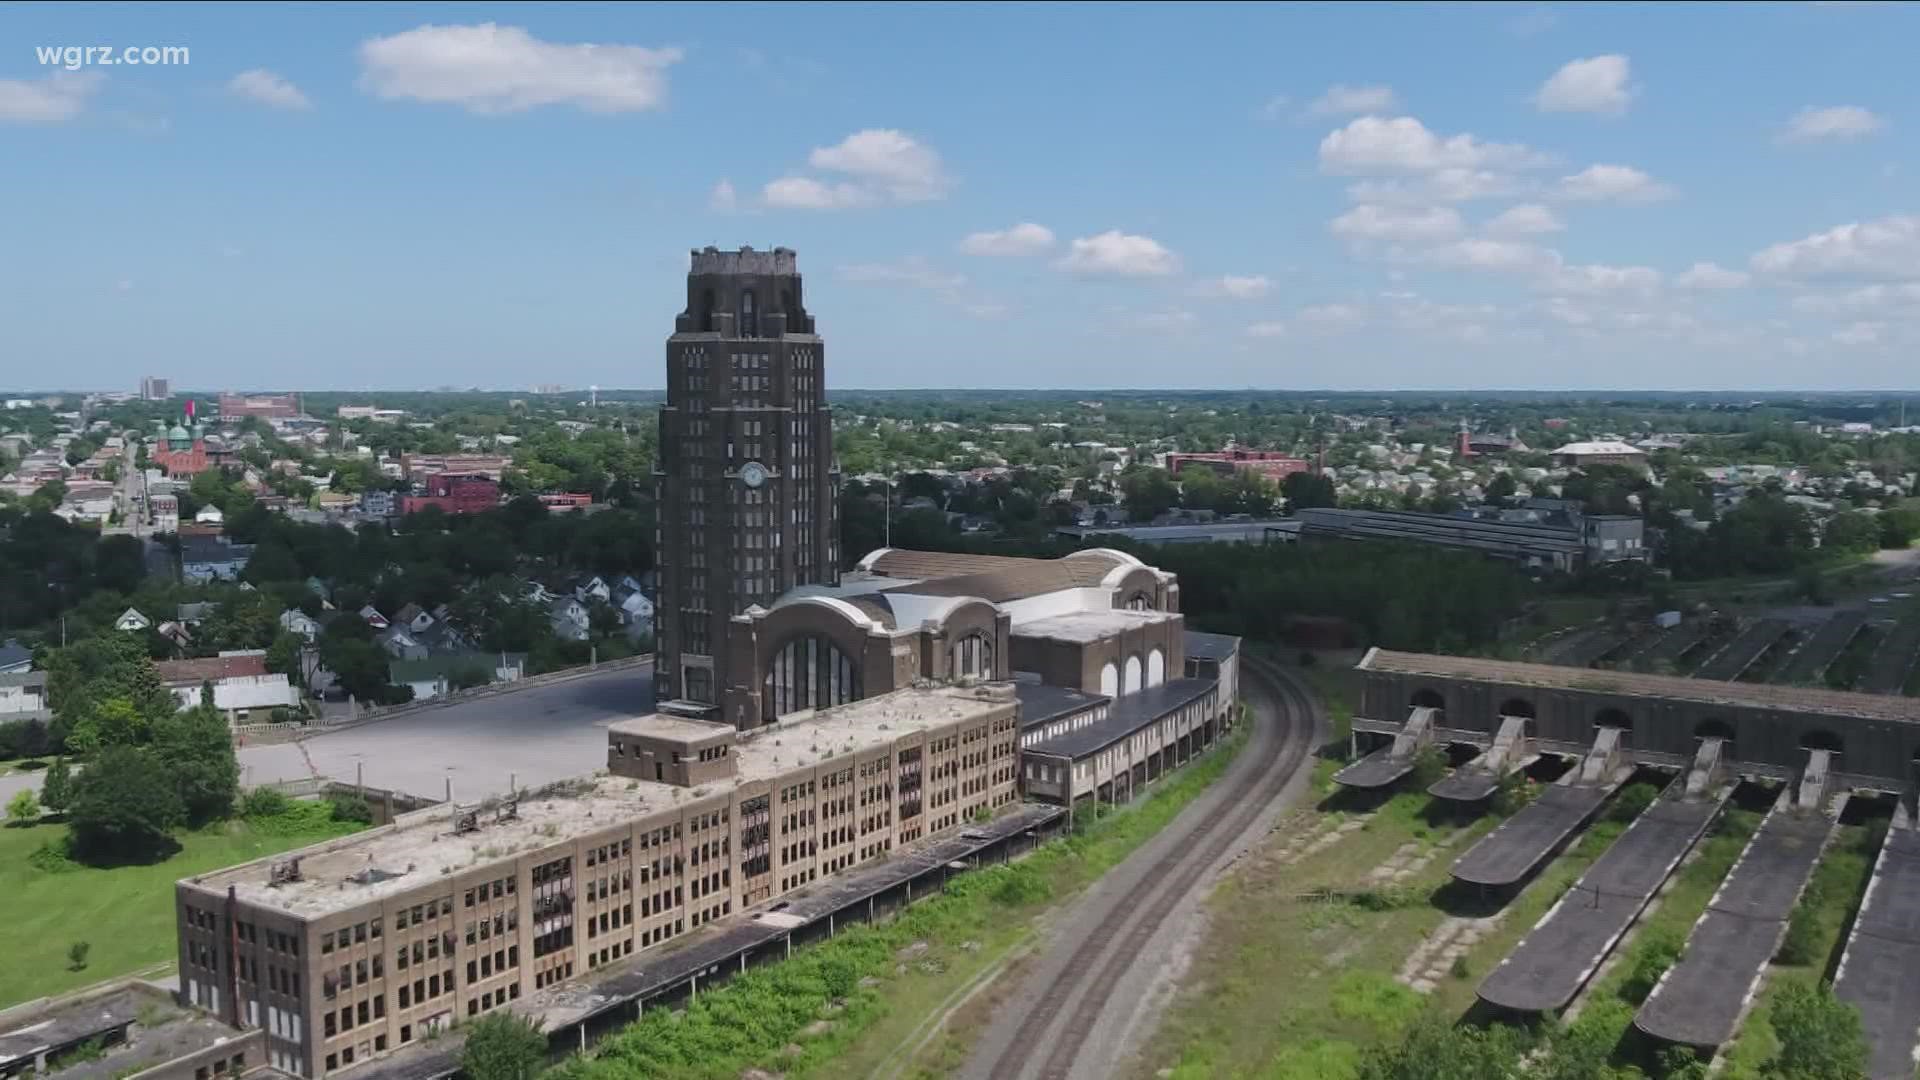 Since 1929, the Central Terminal has stood watch over Buffalo's East Side, a beacon in Polonia.